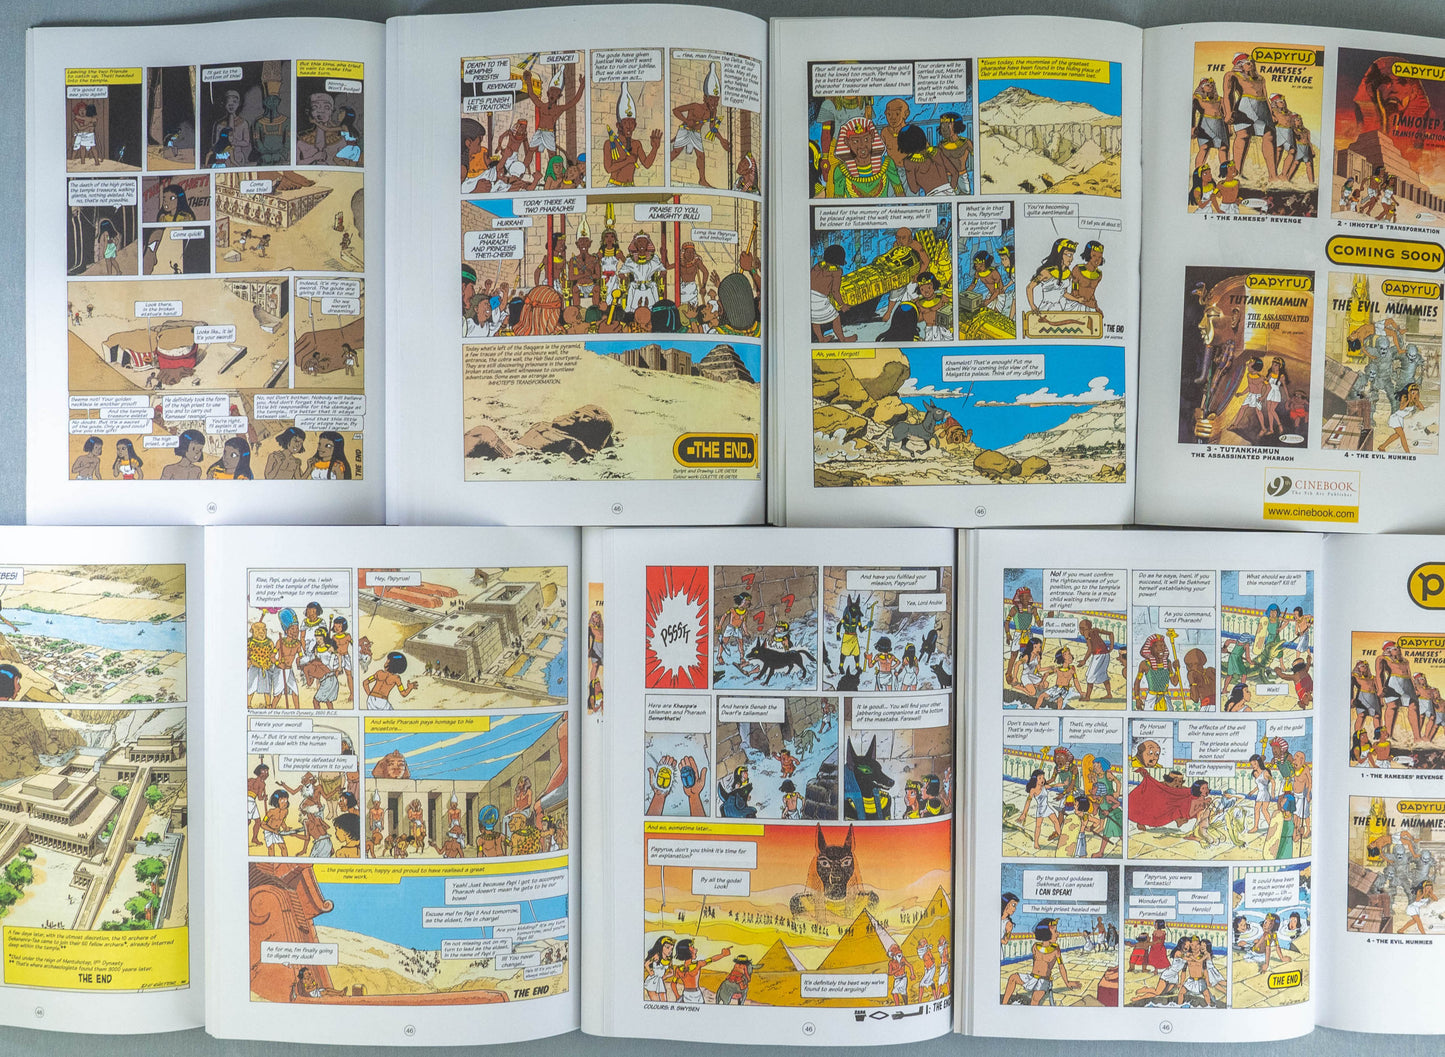 PAPYRUS: Cinebook Paperback Edition Comics Full Set of 7 Books by De Gieter